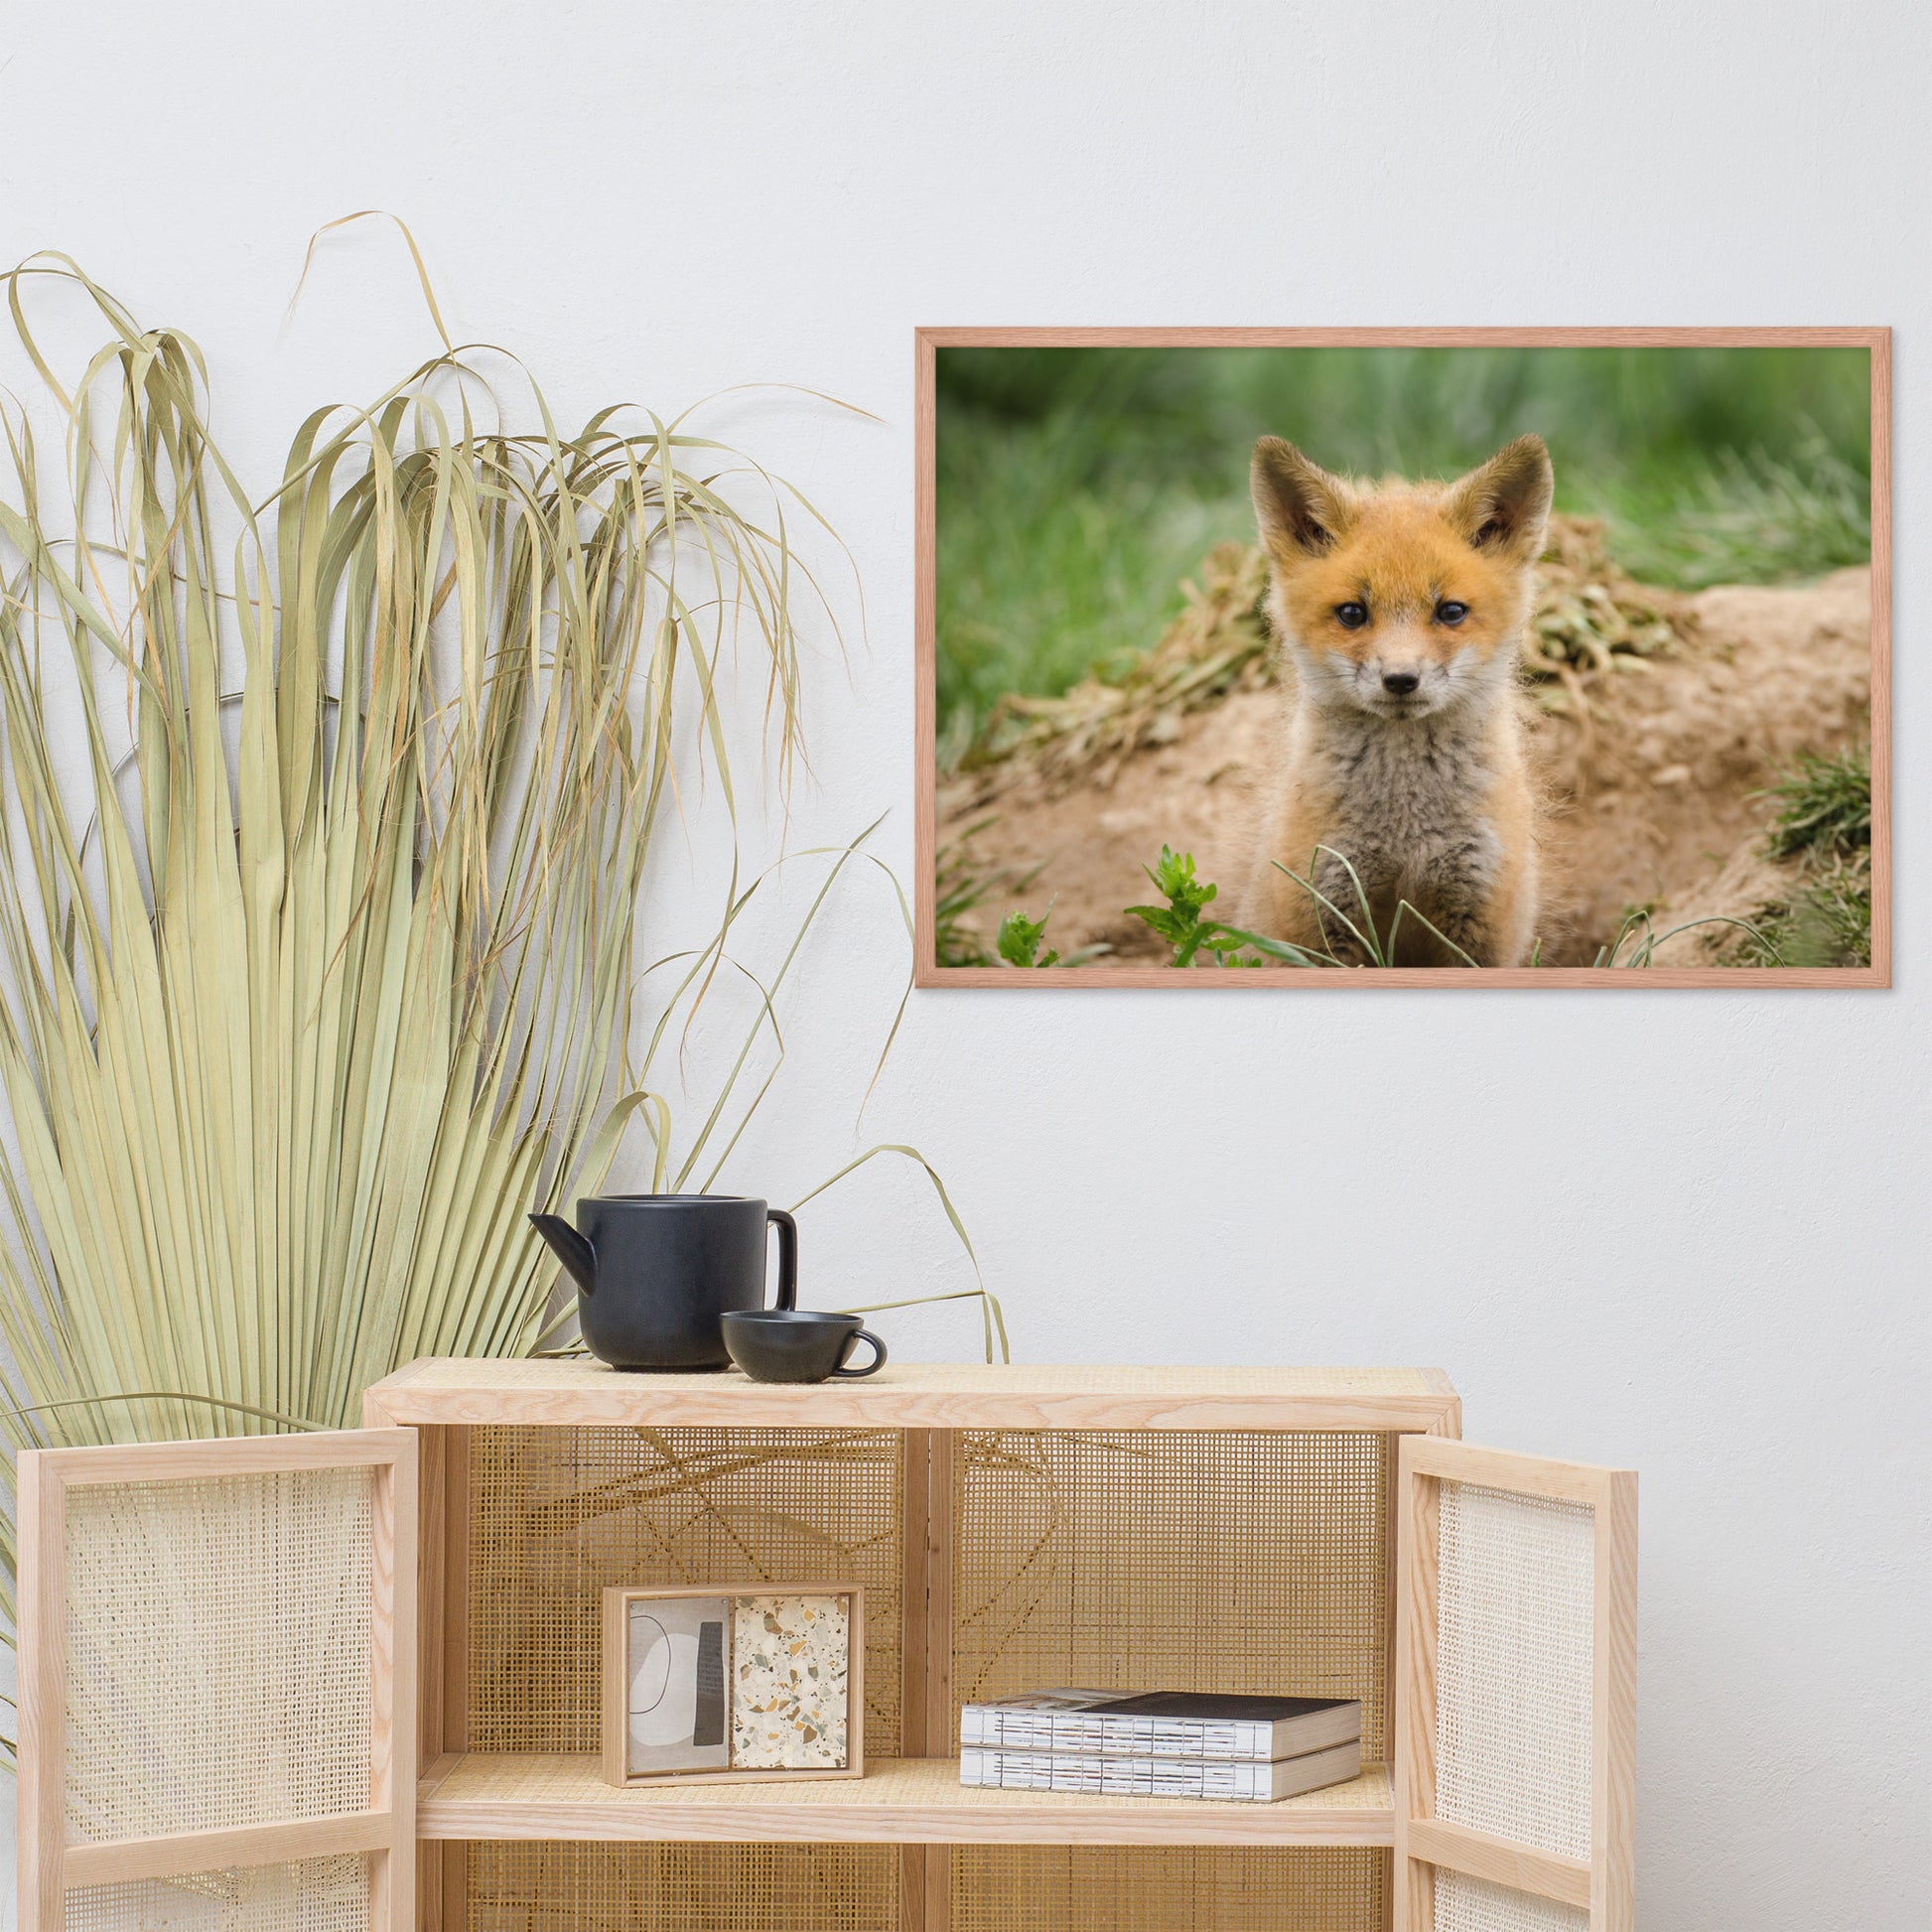 Spa Art For Bathroom: Baby Young Red Fox Kit/ Animal / Wildlife / Nature Photographic Artwork - Framed Artwork - Wall Decor